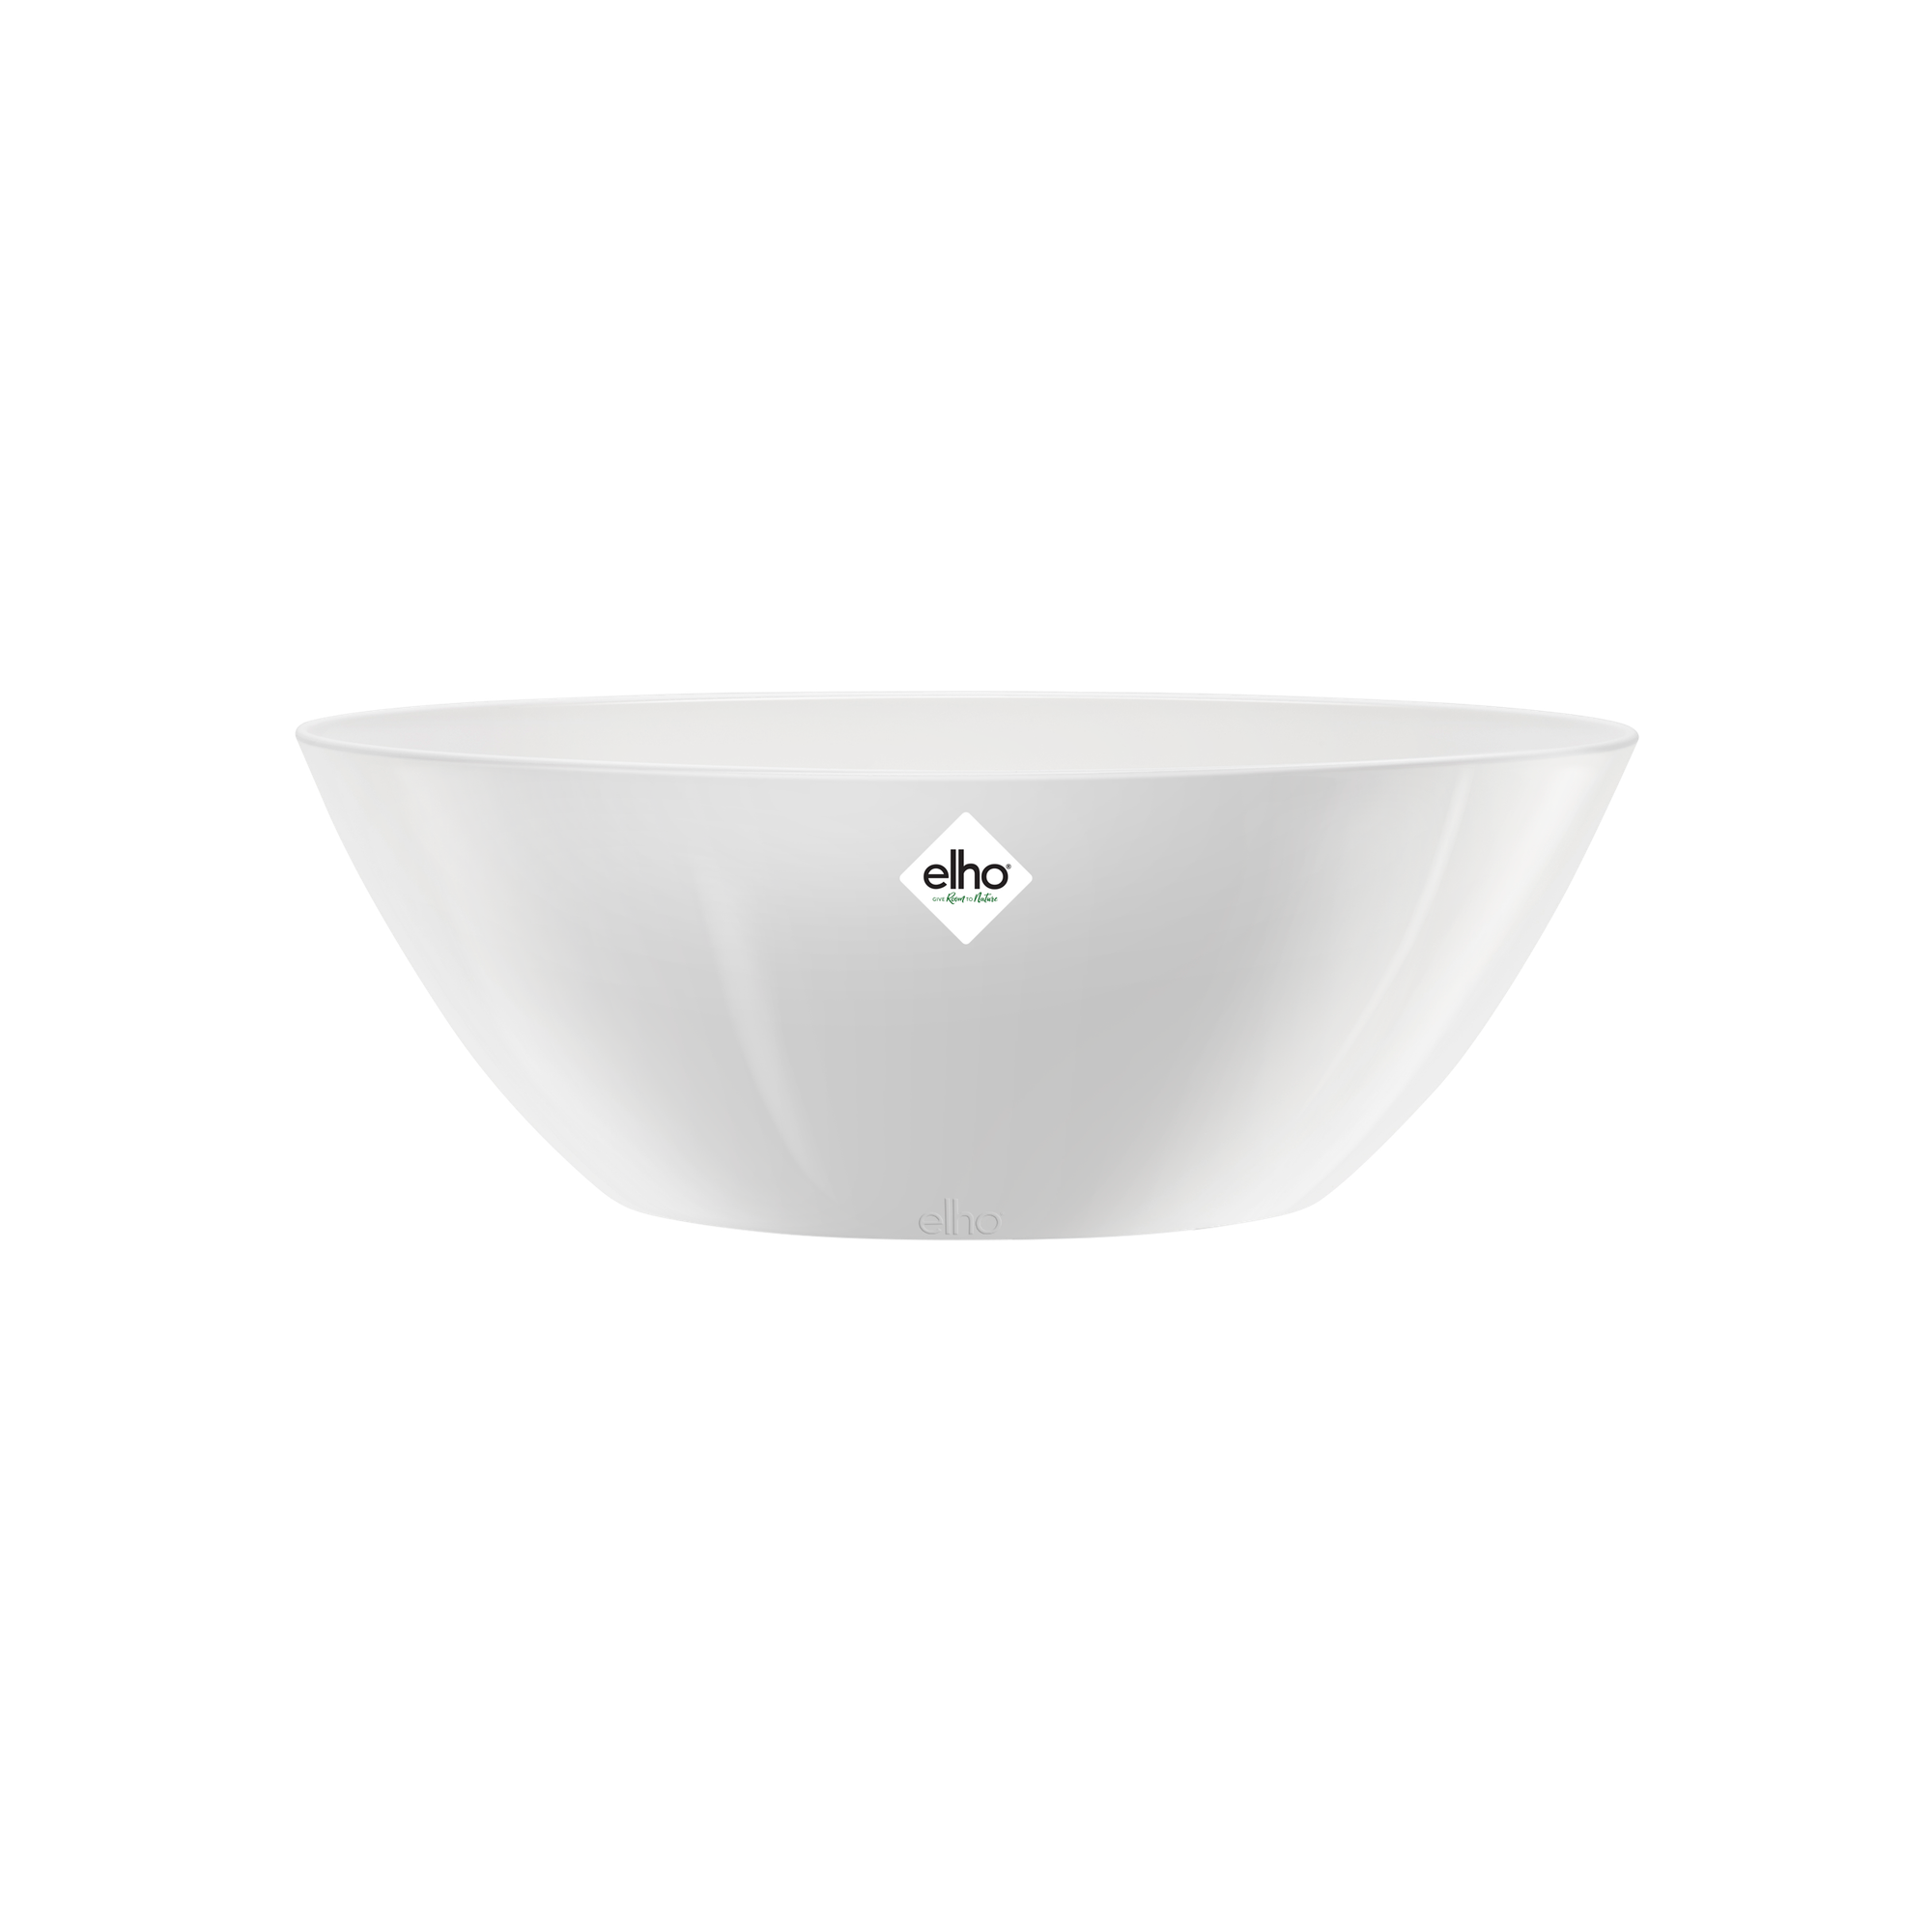 brussels diamond oval 36cm white elho® Give nature to - - room